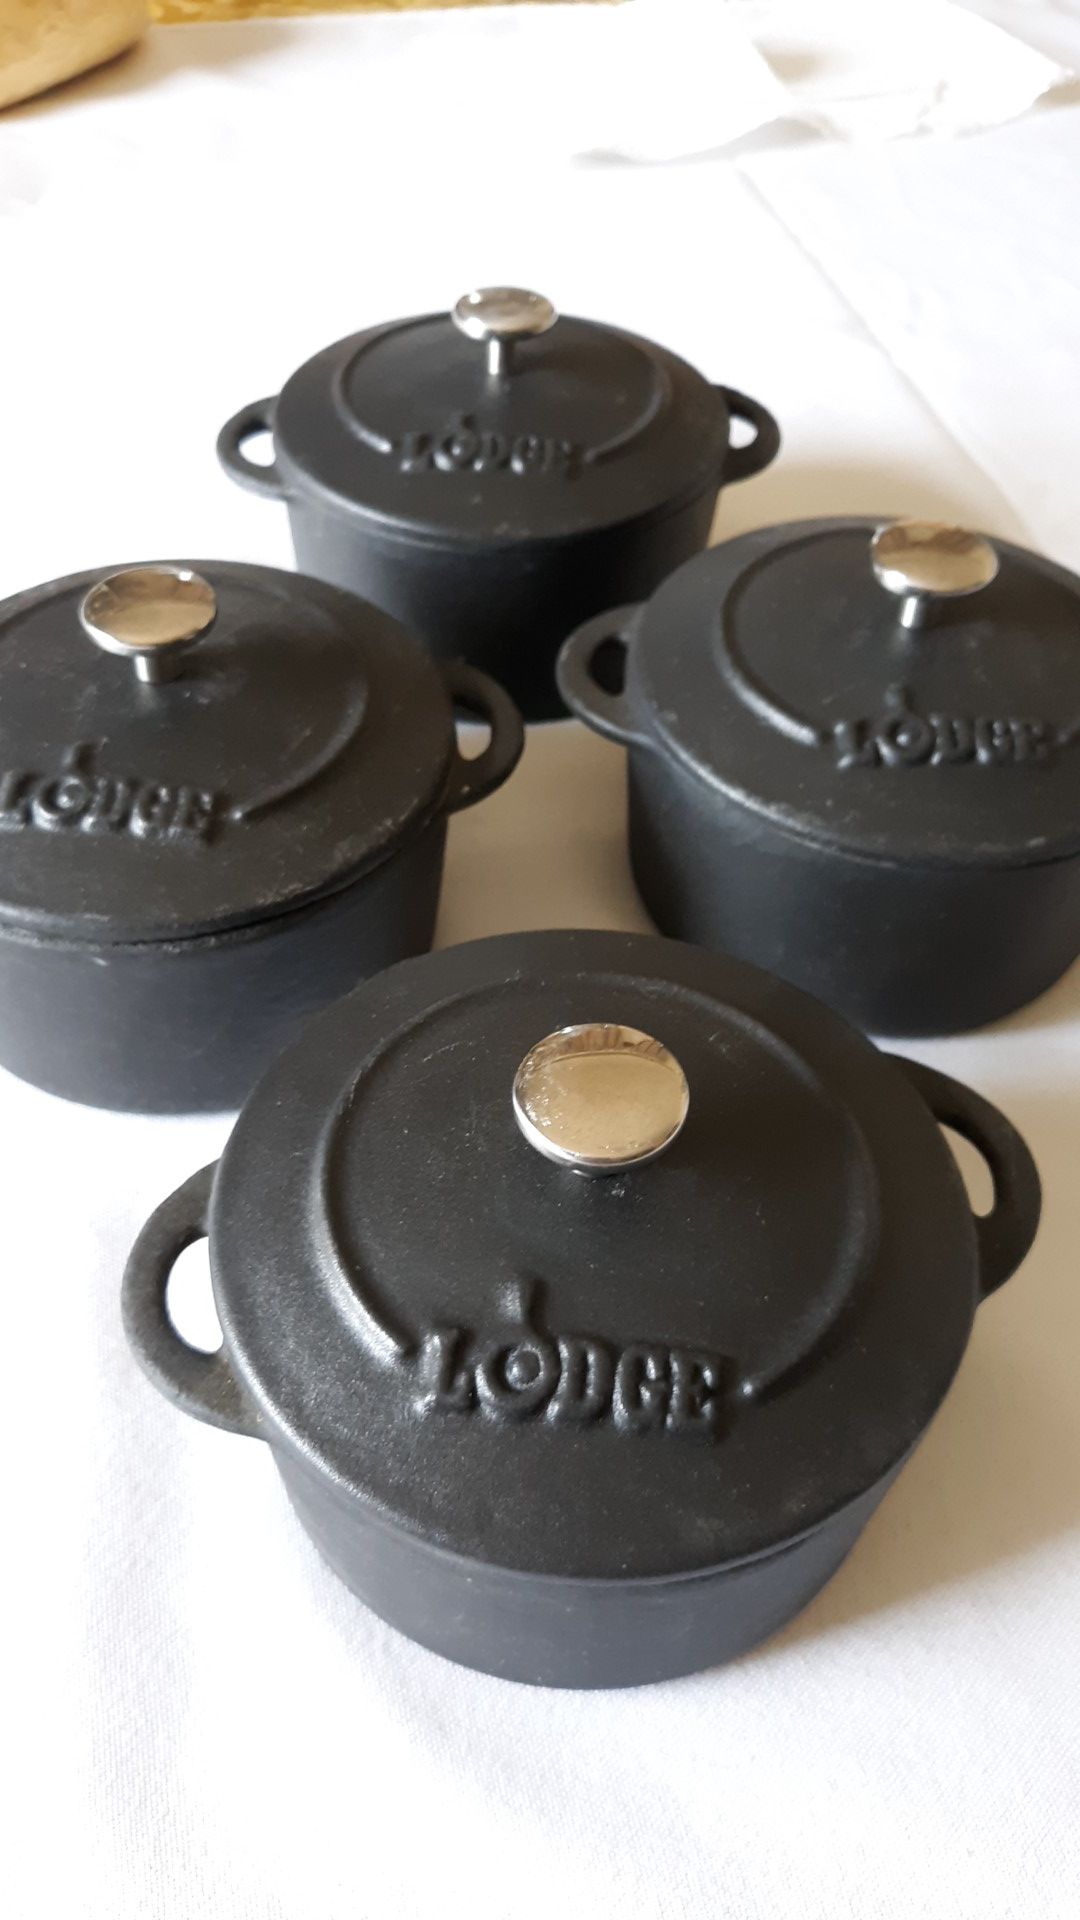 Set of 4 Lodge Cast Iron 4" Mini Dutch Oven Pots with Lids. Great Condition